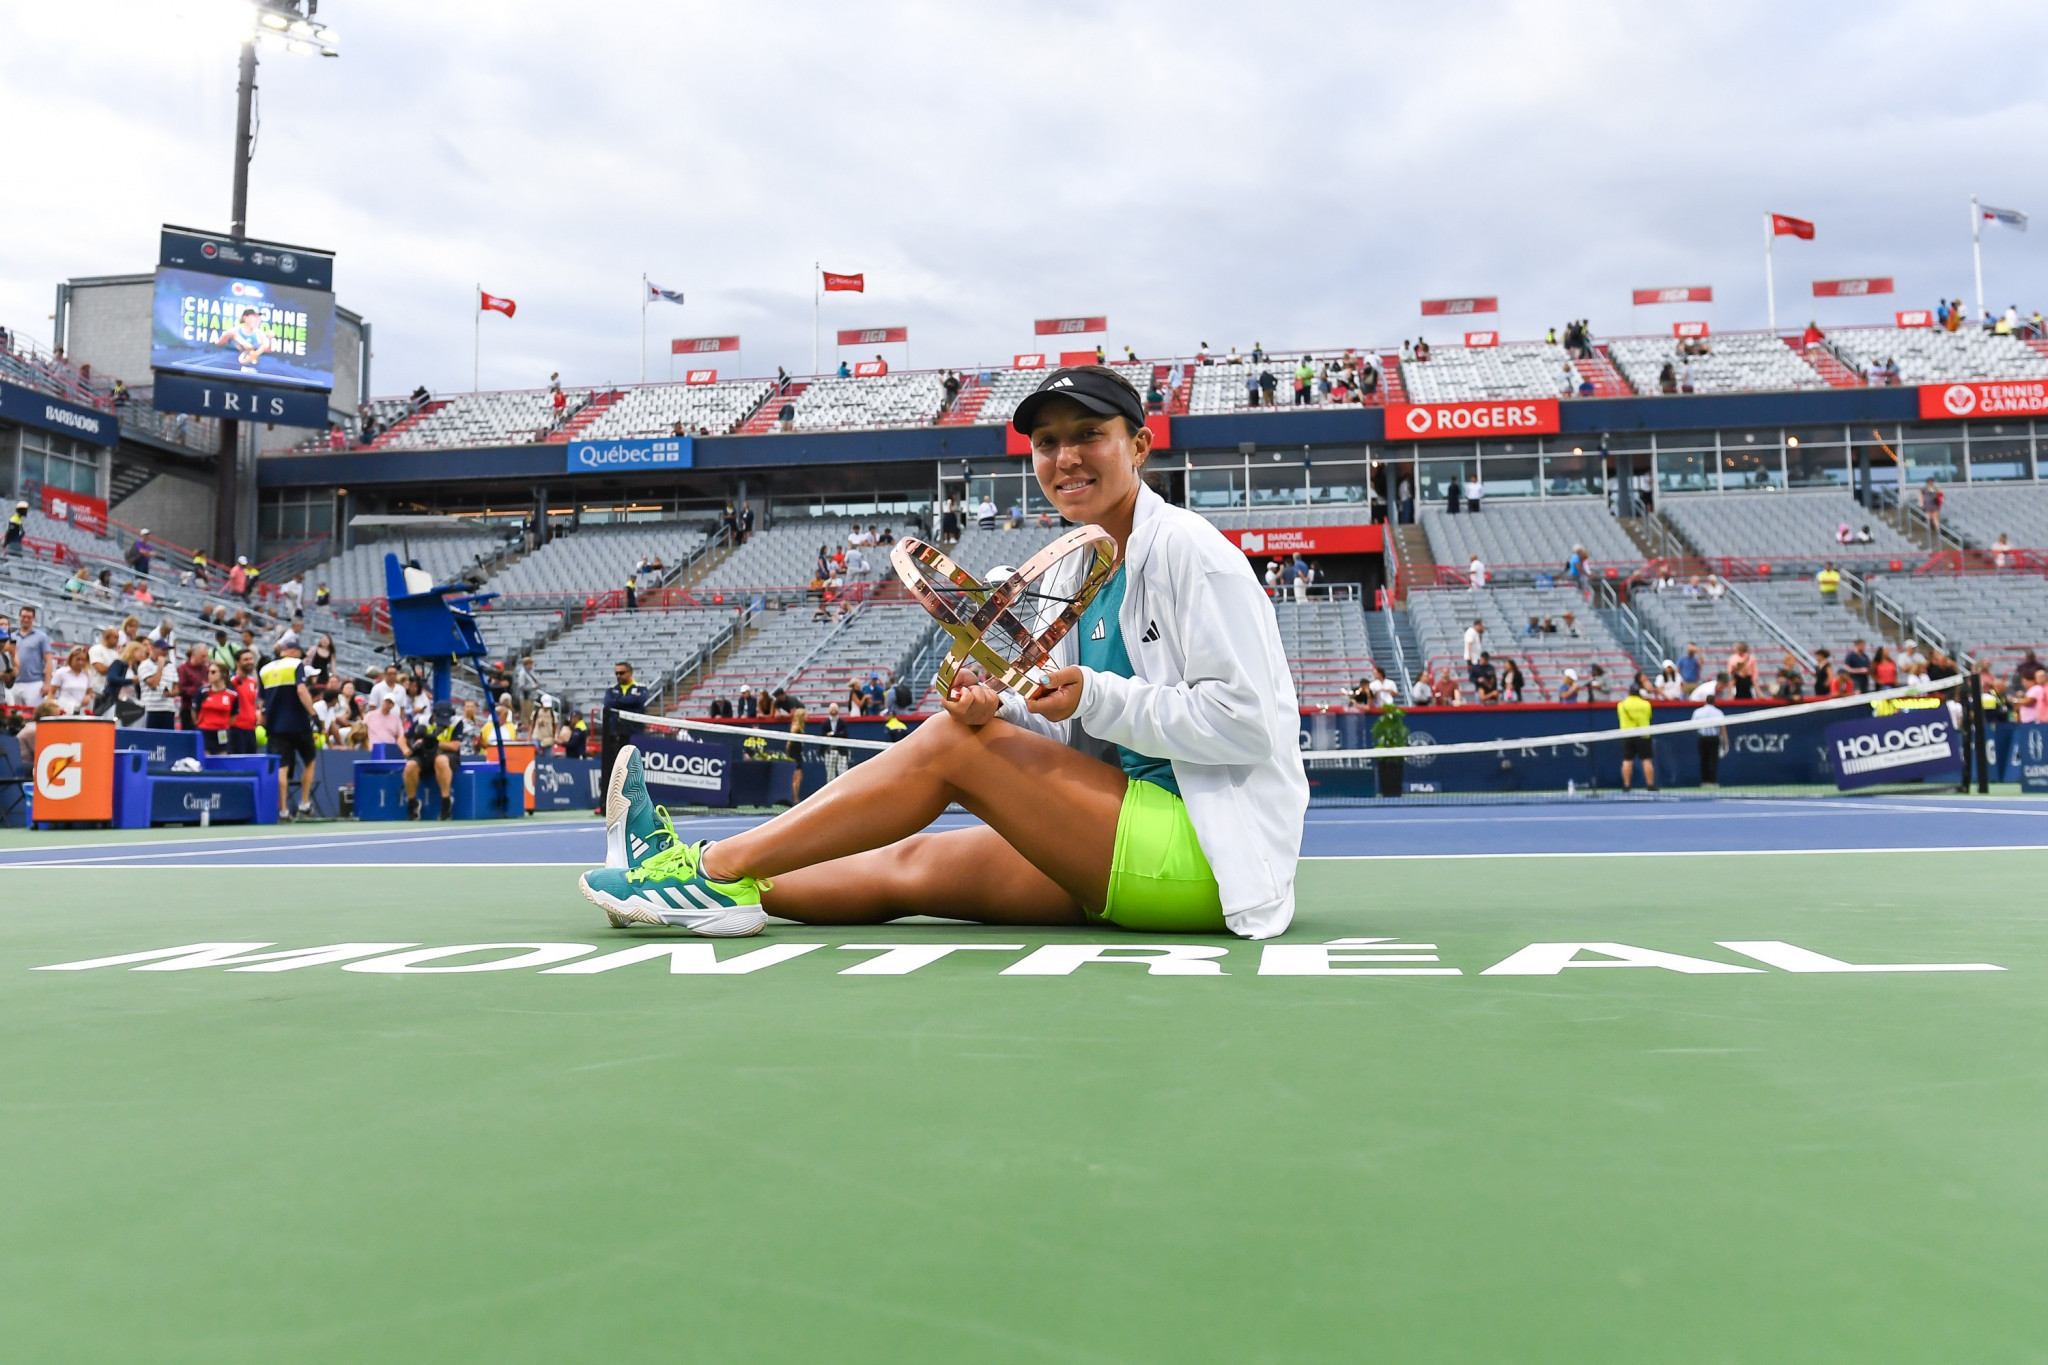 Jessica Pegula of the United States dropped just one game in the women's singles final as she cruised to the Canadian Open title in Montreal ©Getty Images